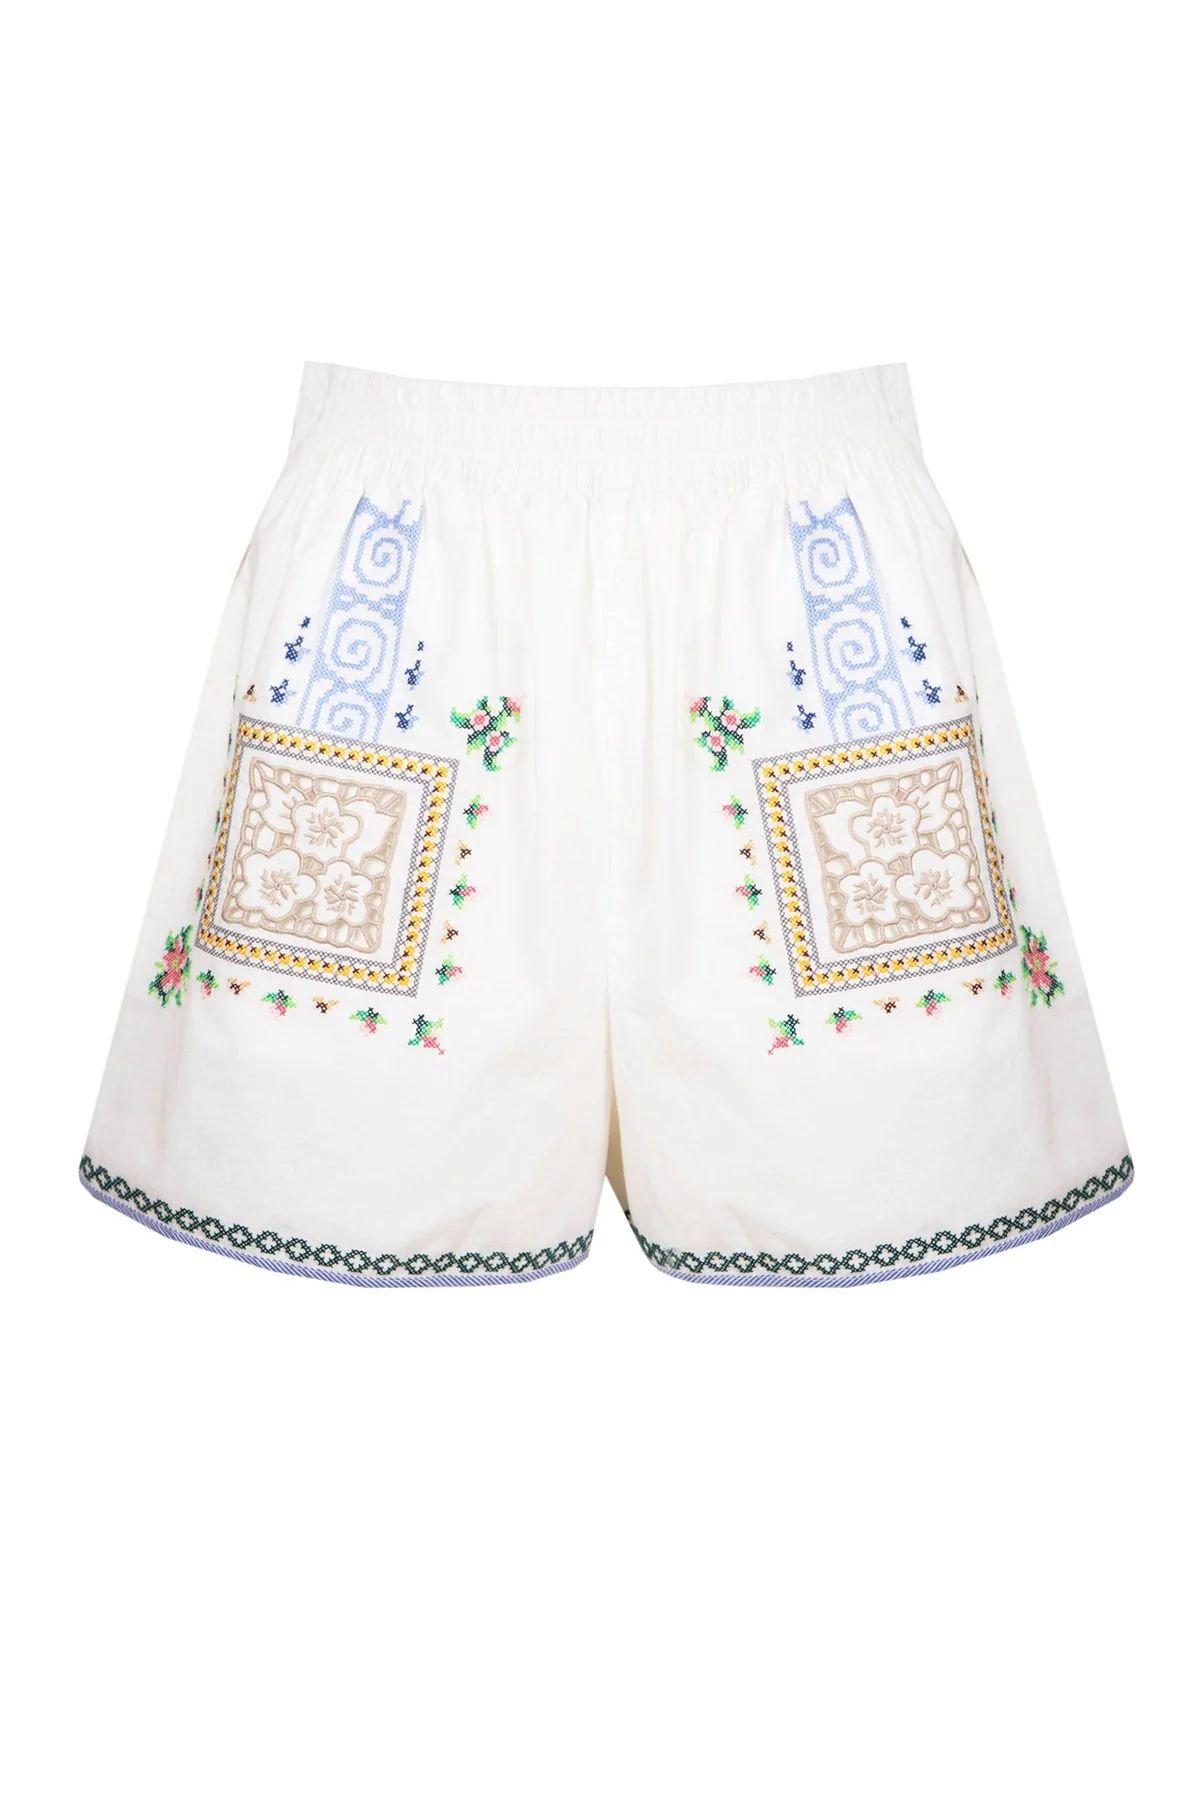 Amanda Short in Mosaic Embroidery | Over The Moon